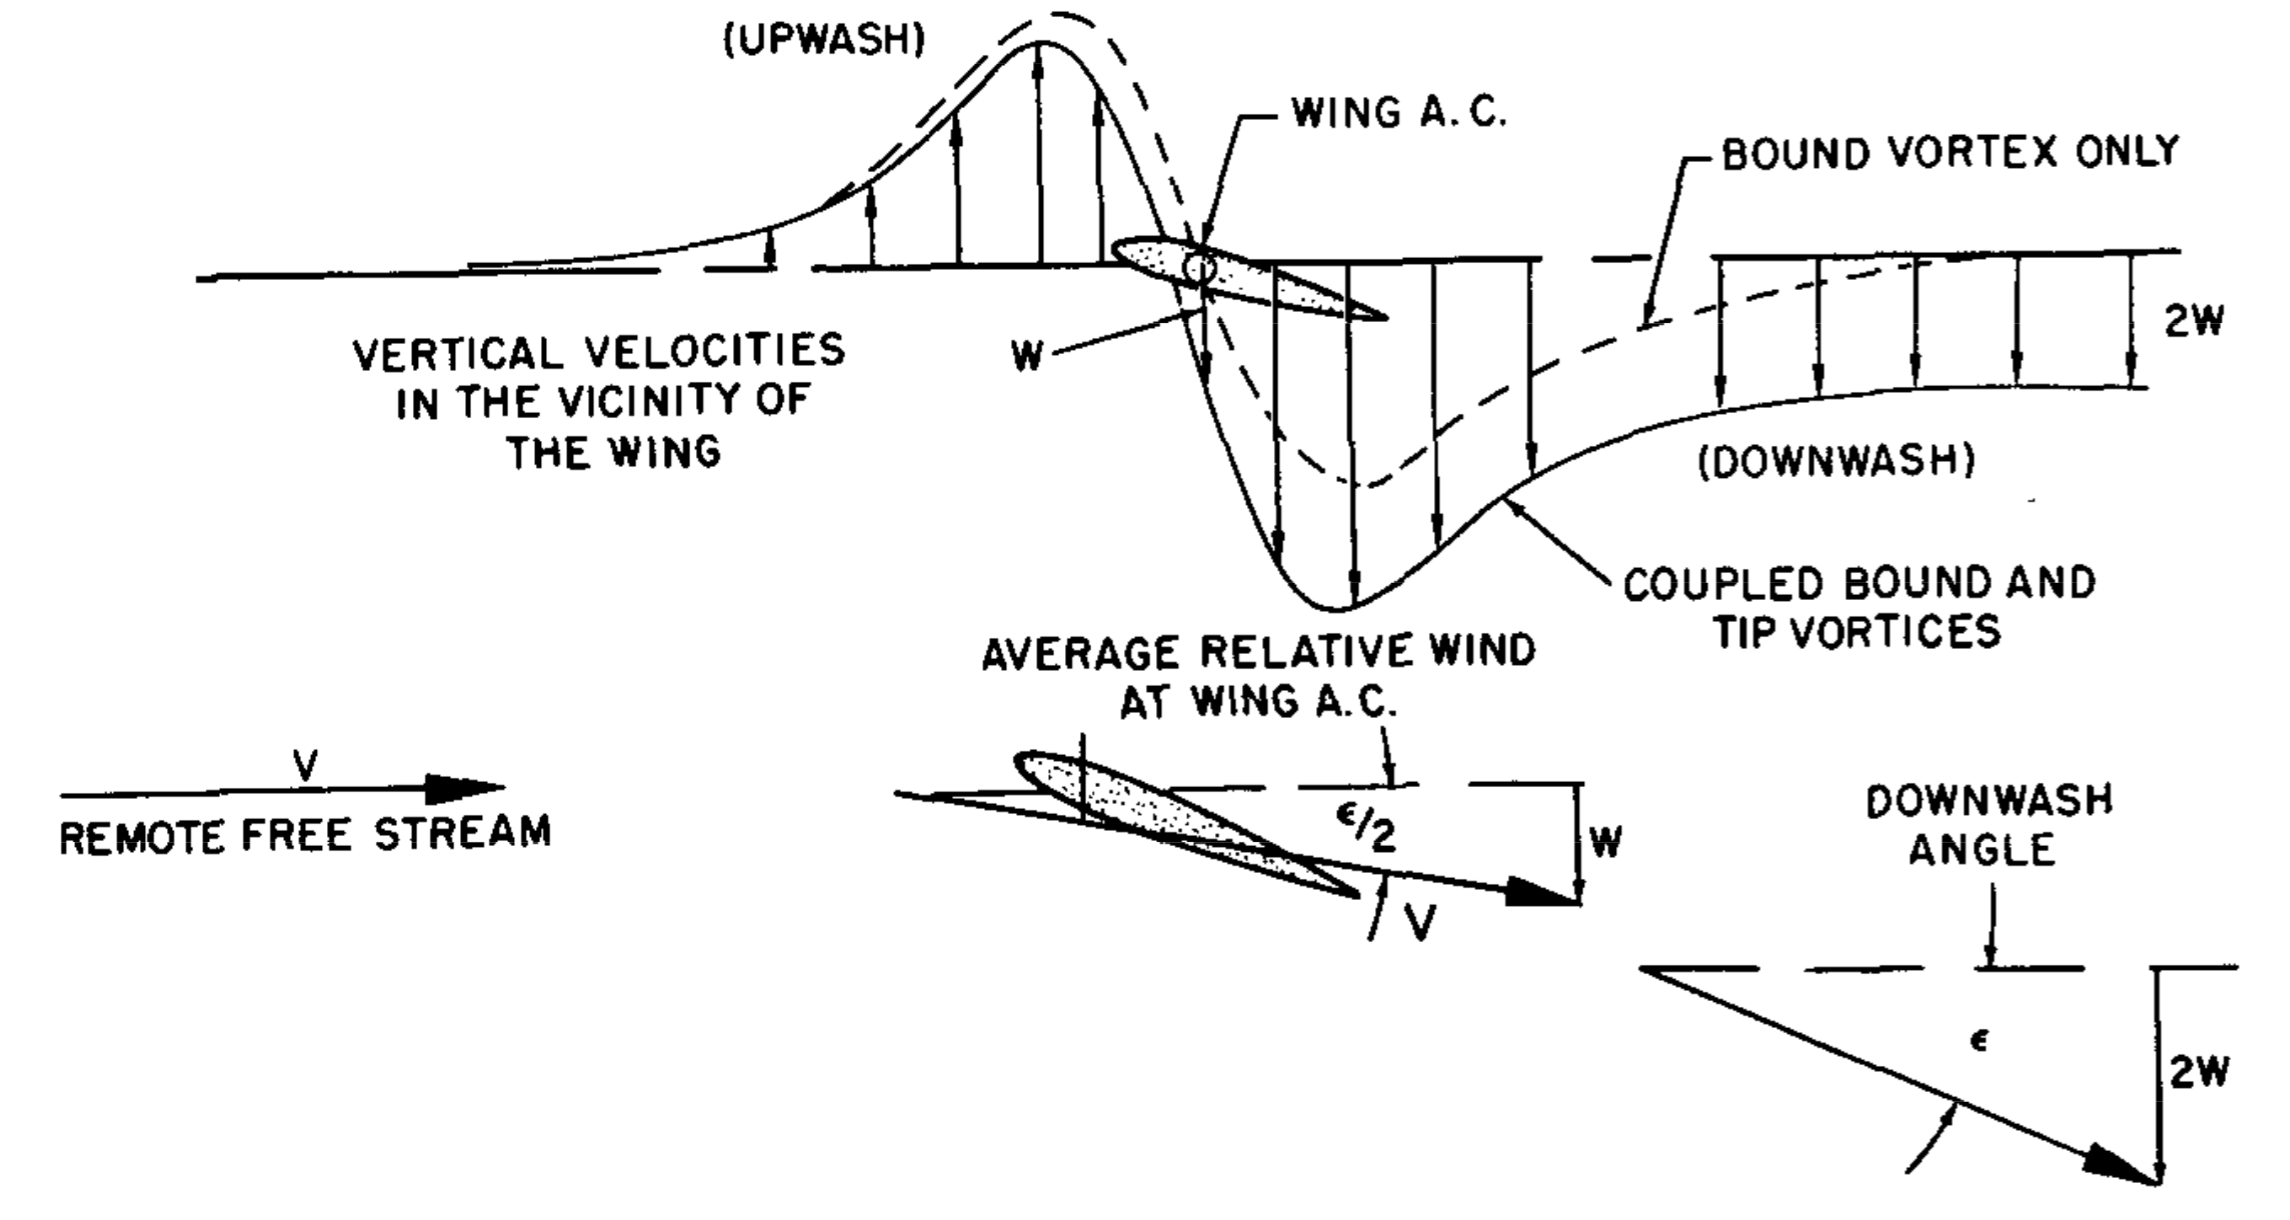 Wingtip vortices cause downwash which reduces the effective angle